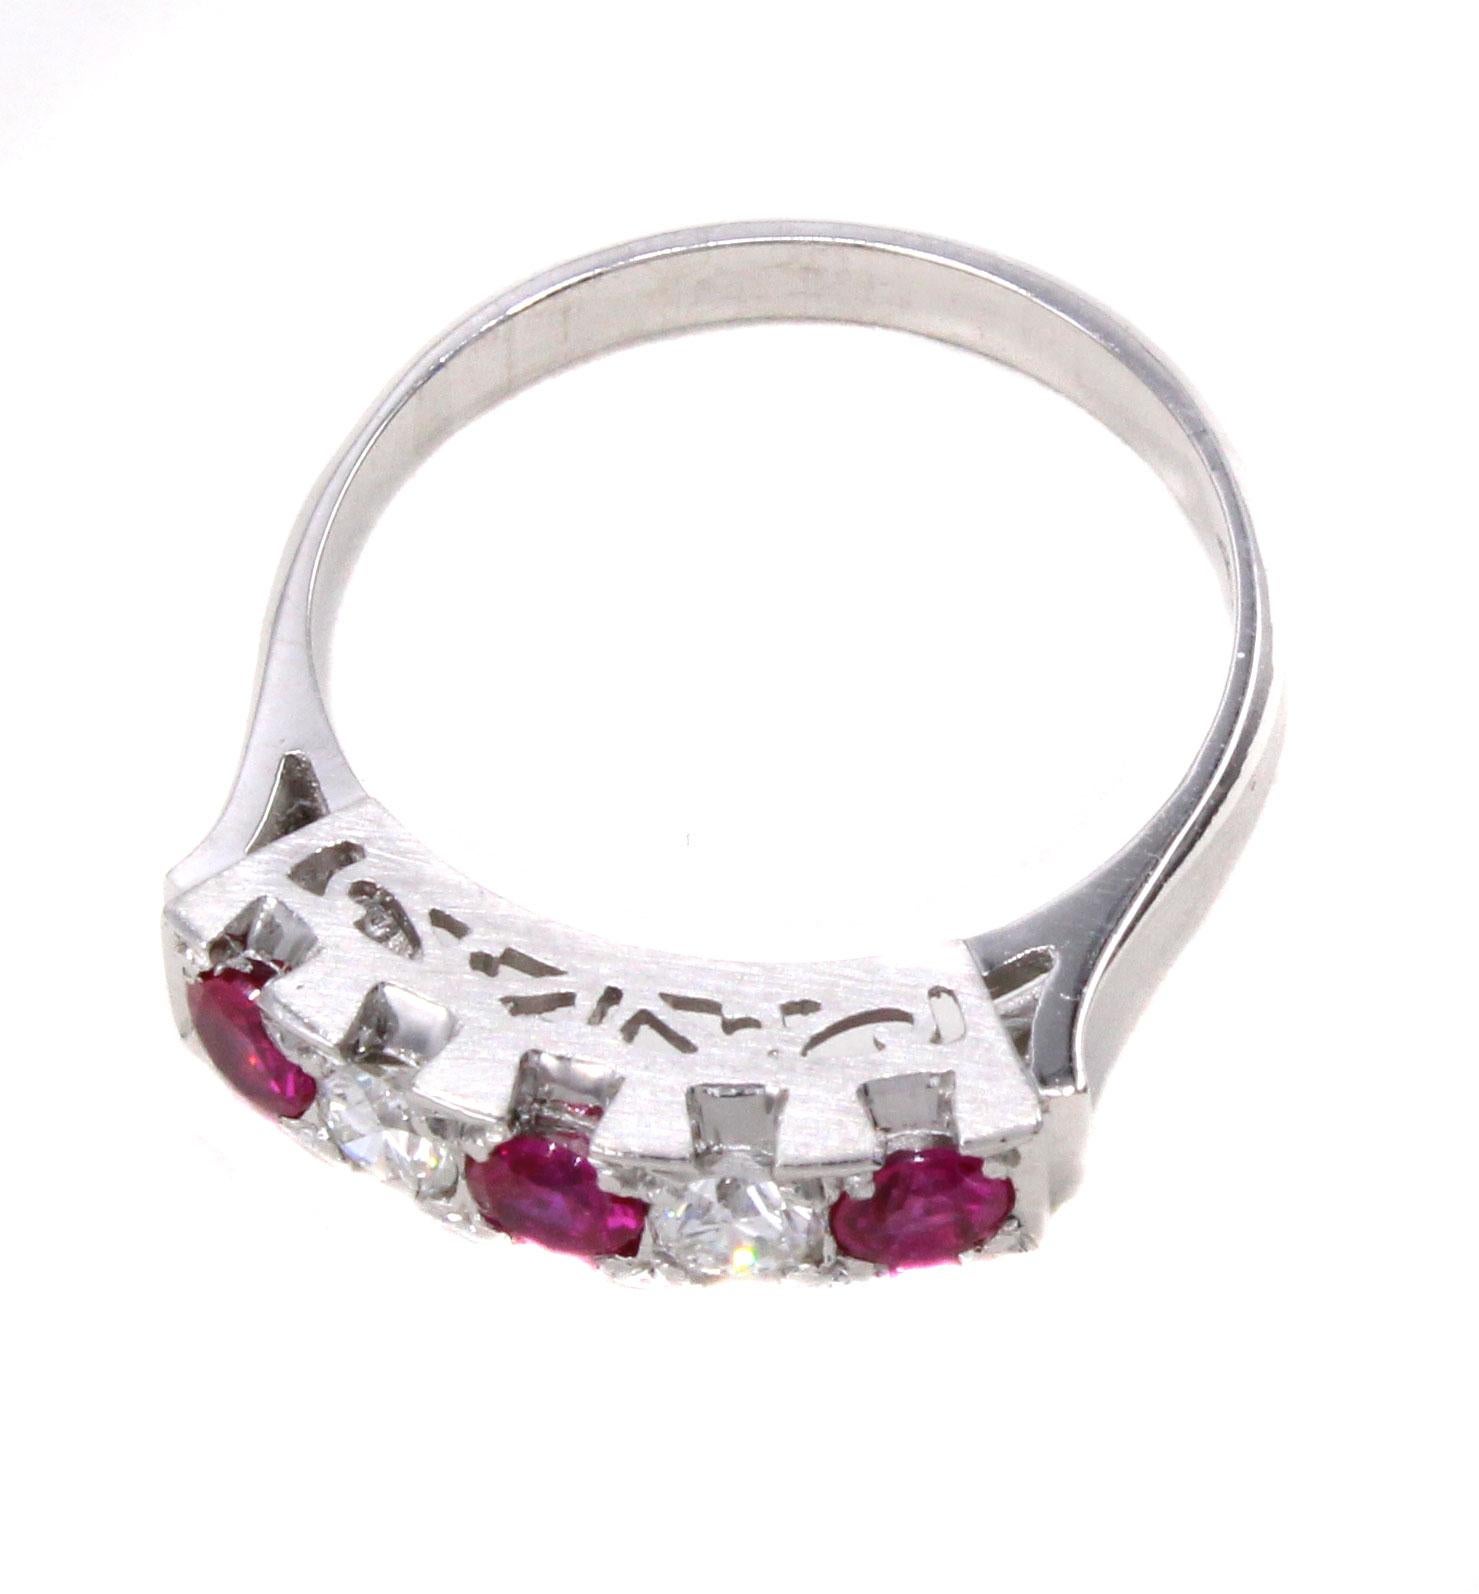 This finely handcrafted platinum 1950s ring features 3 vivid red round rubies spaced by 2 bright white round cut diamonds. An amazing contrast of color, beautifully set on a gallery with decorative a jour work with a mat polish. Ring size 5, can be